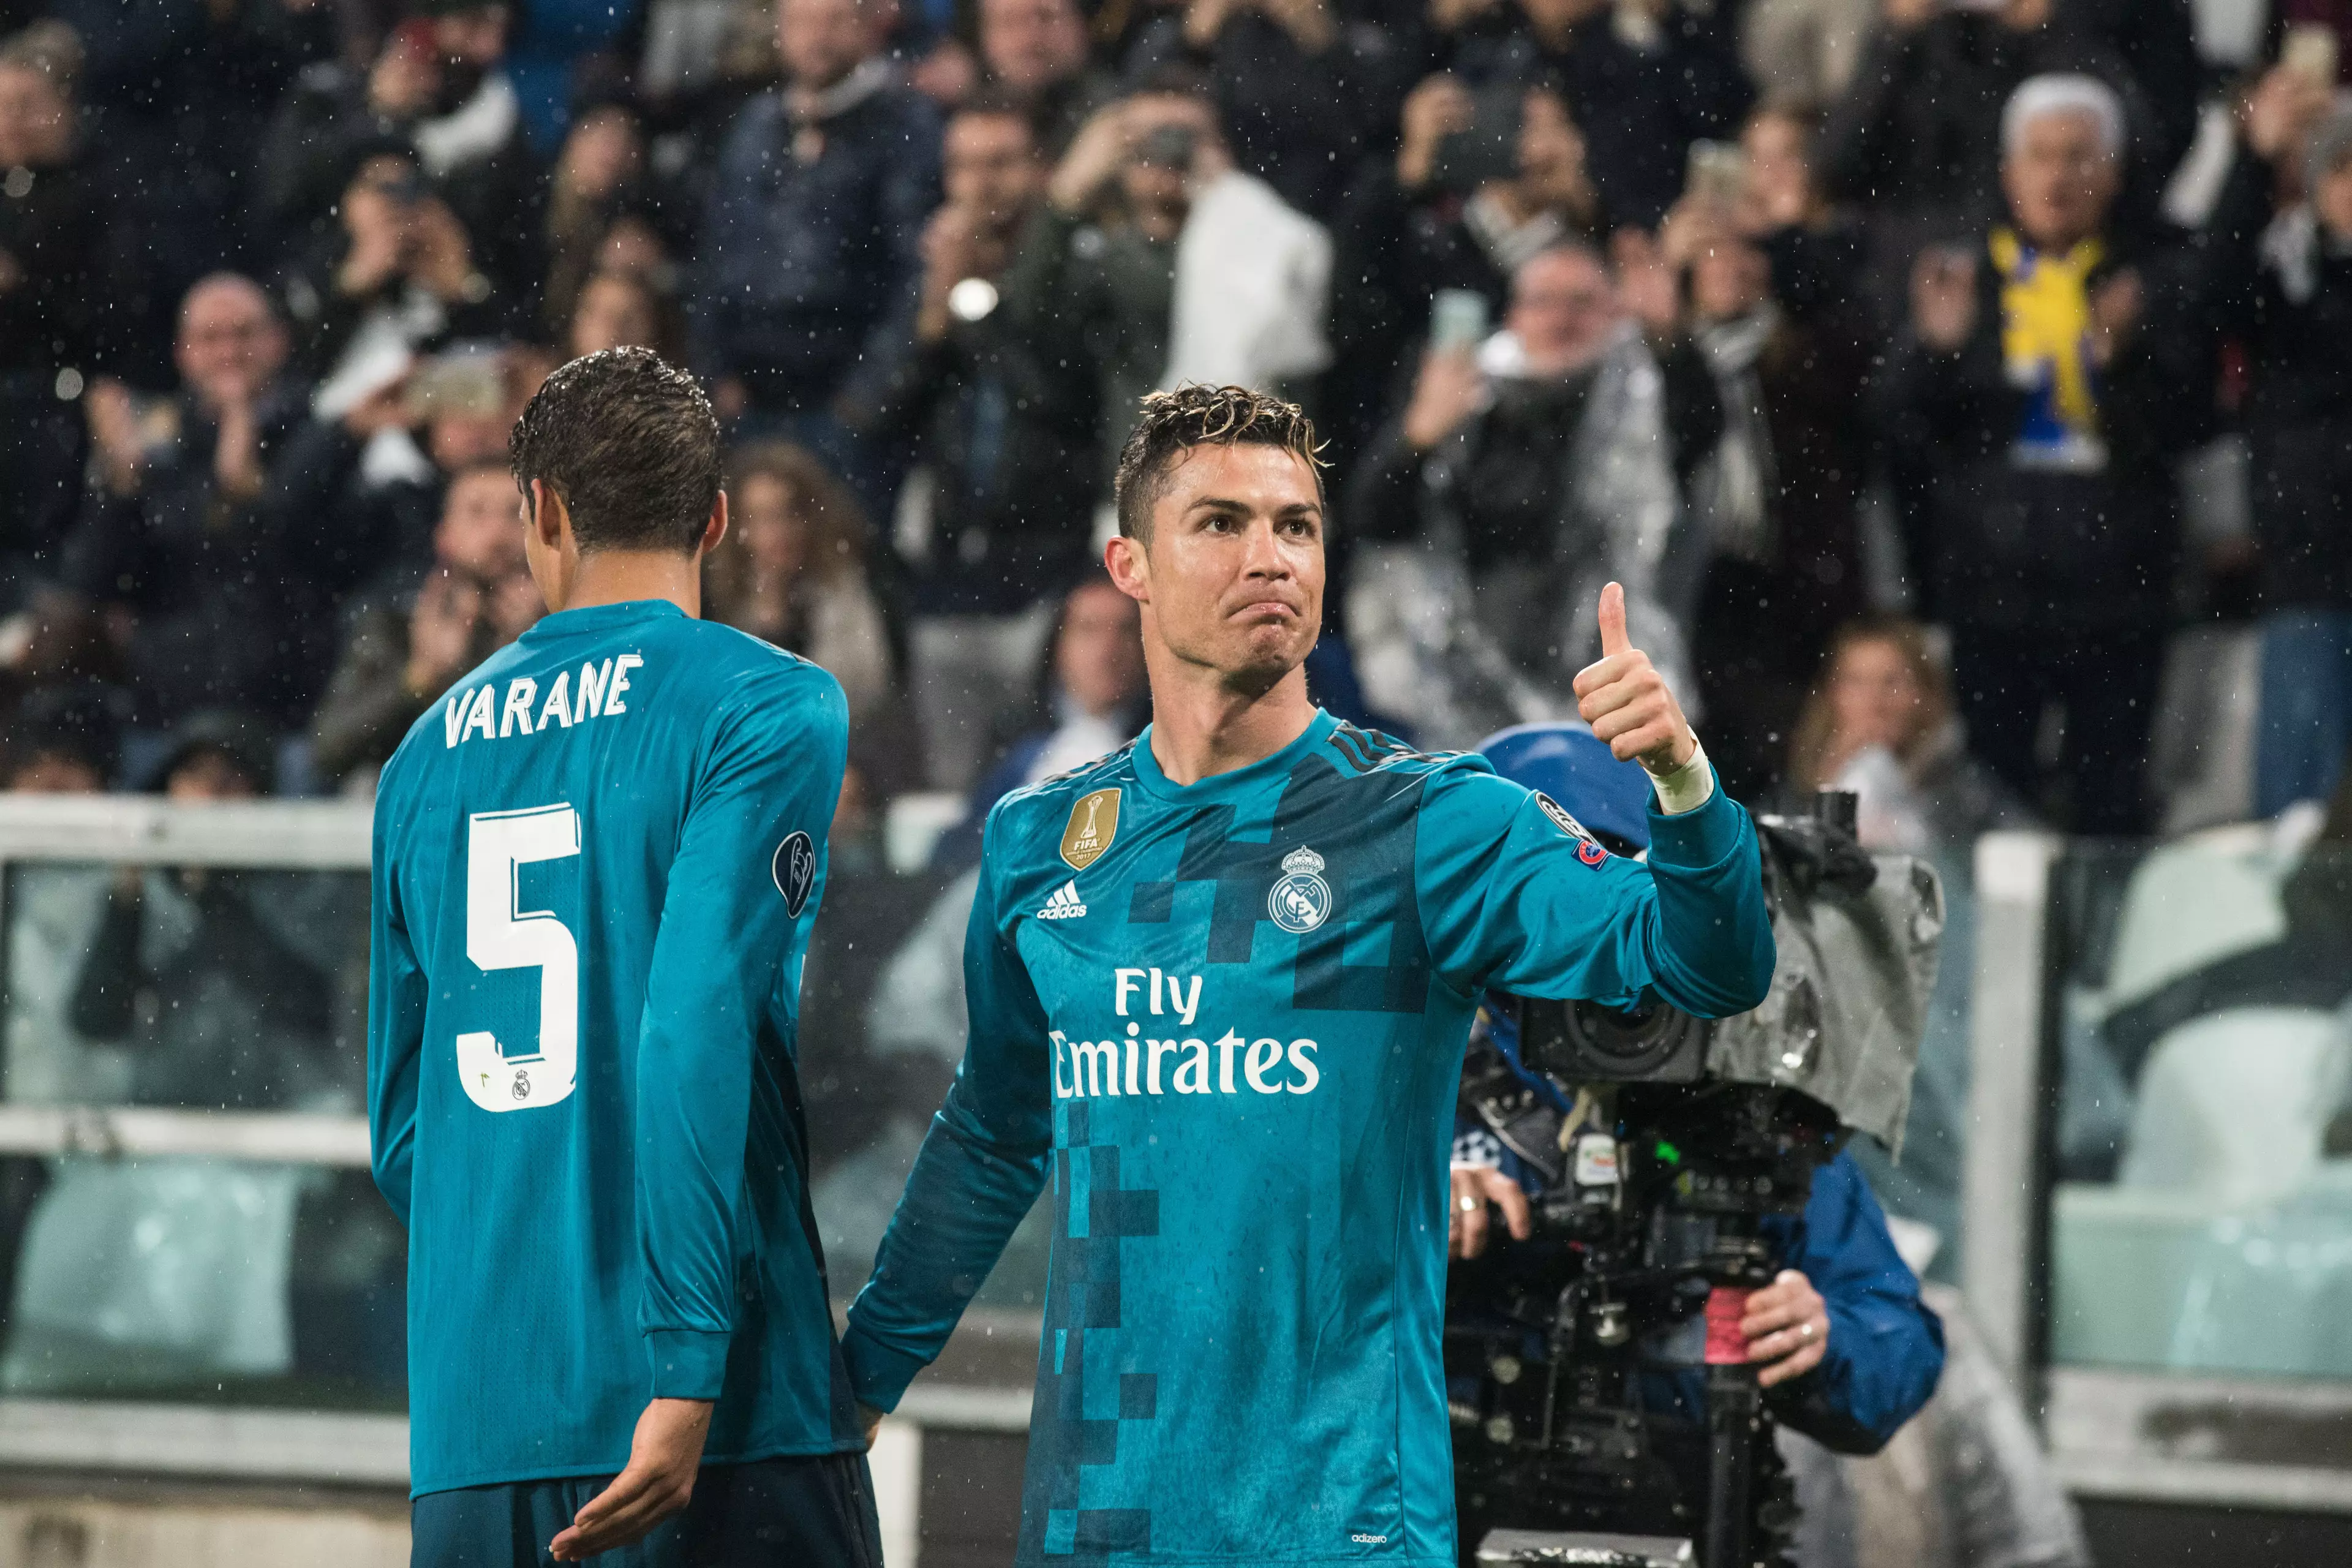 Ronaldo gestures to Juventus fans after scoring past them in last season's Champions League. Image: PA